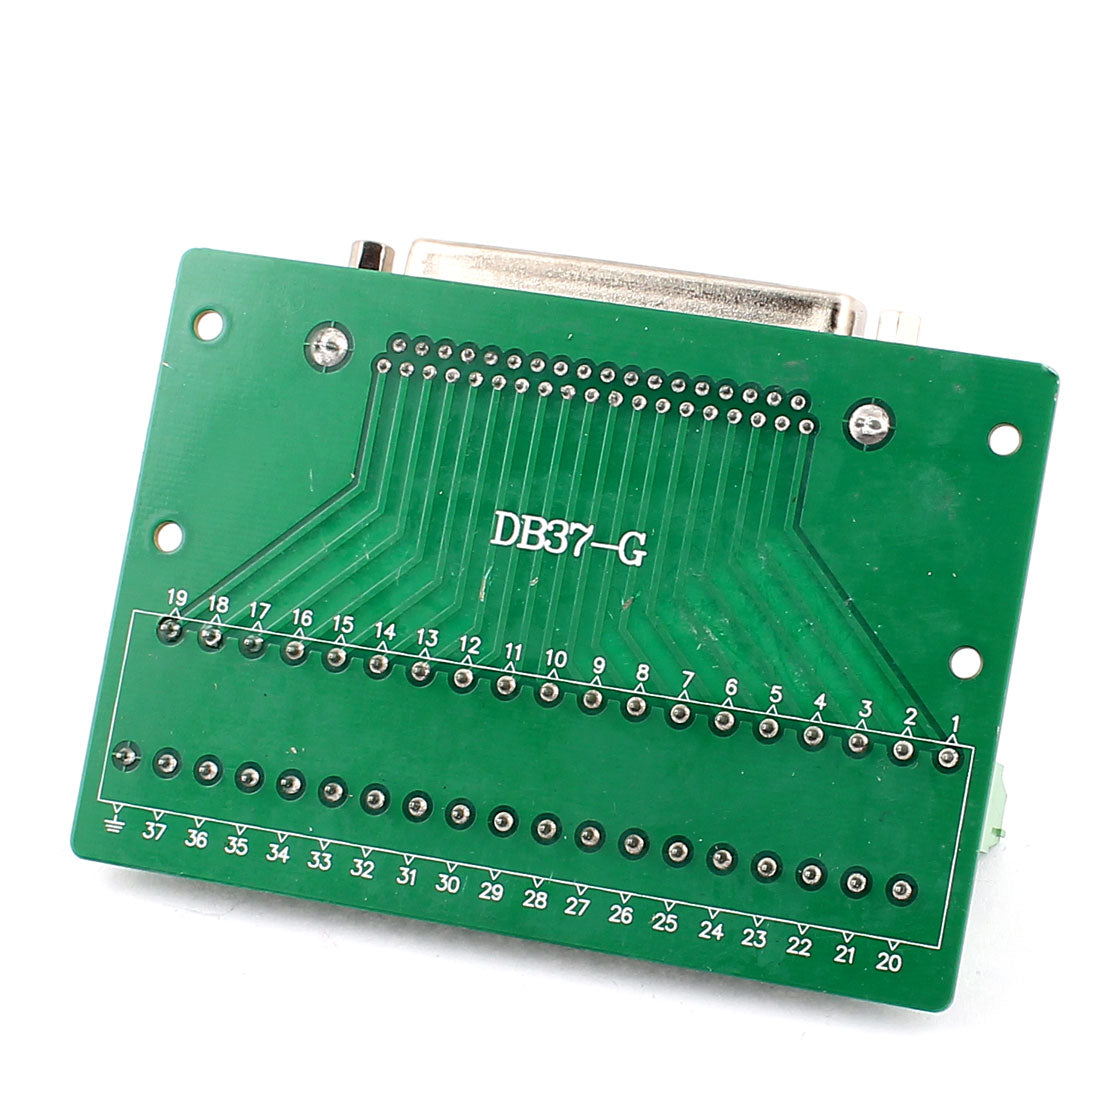 uxcell Uxcell DB37 D-SUB Female Adapter to 37 Pin Terminal Dual Row Screw Breakout Board